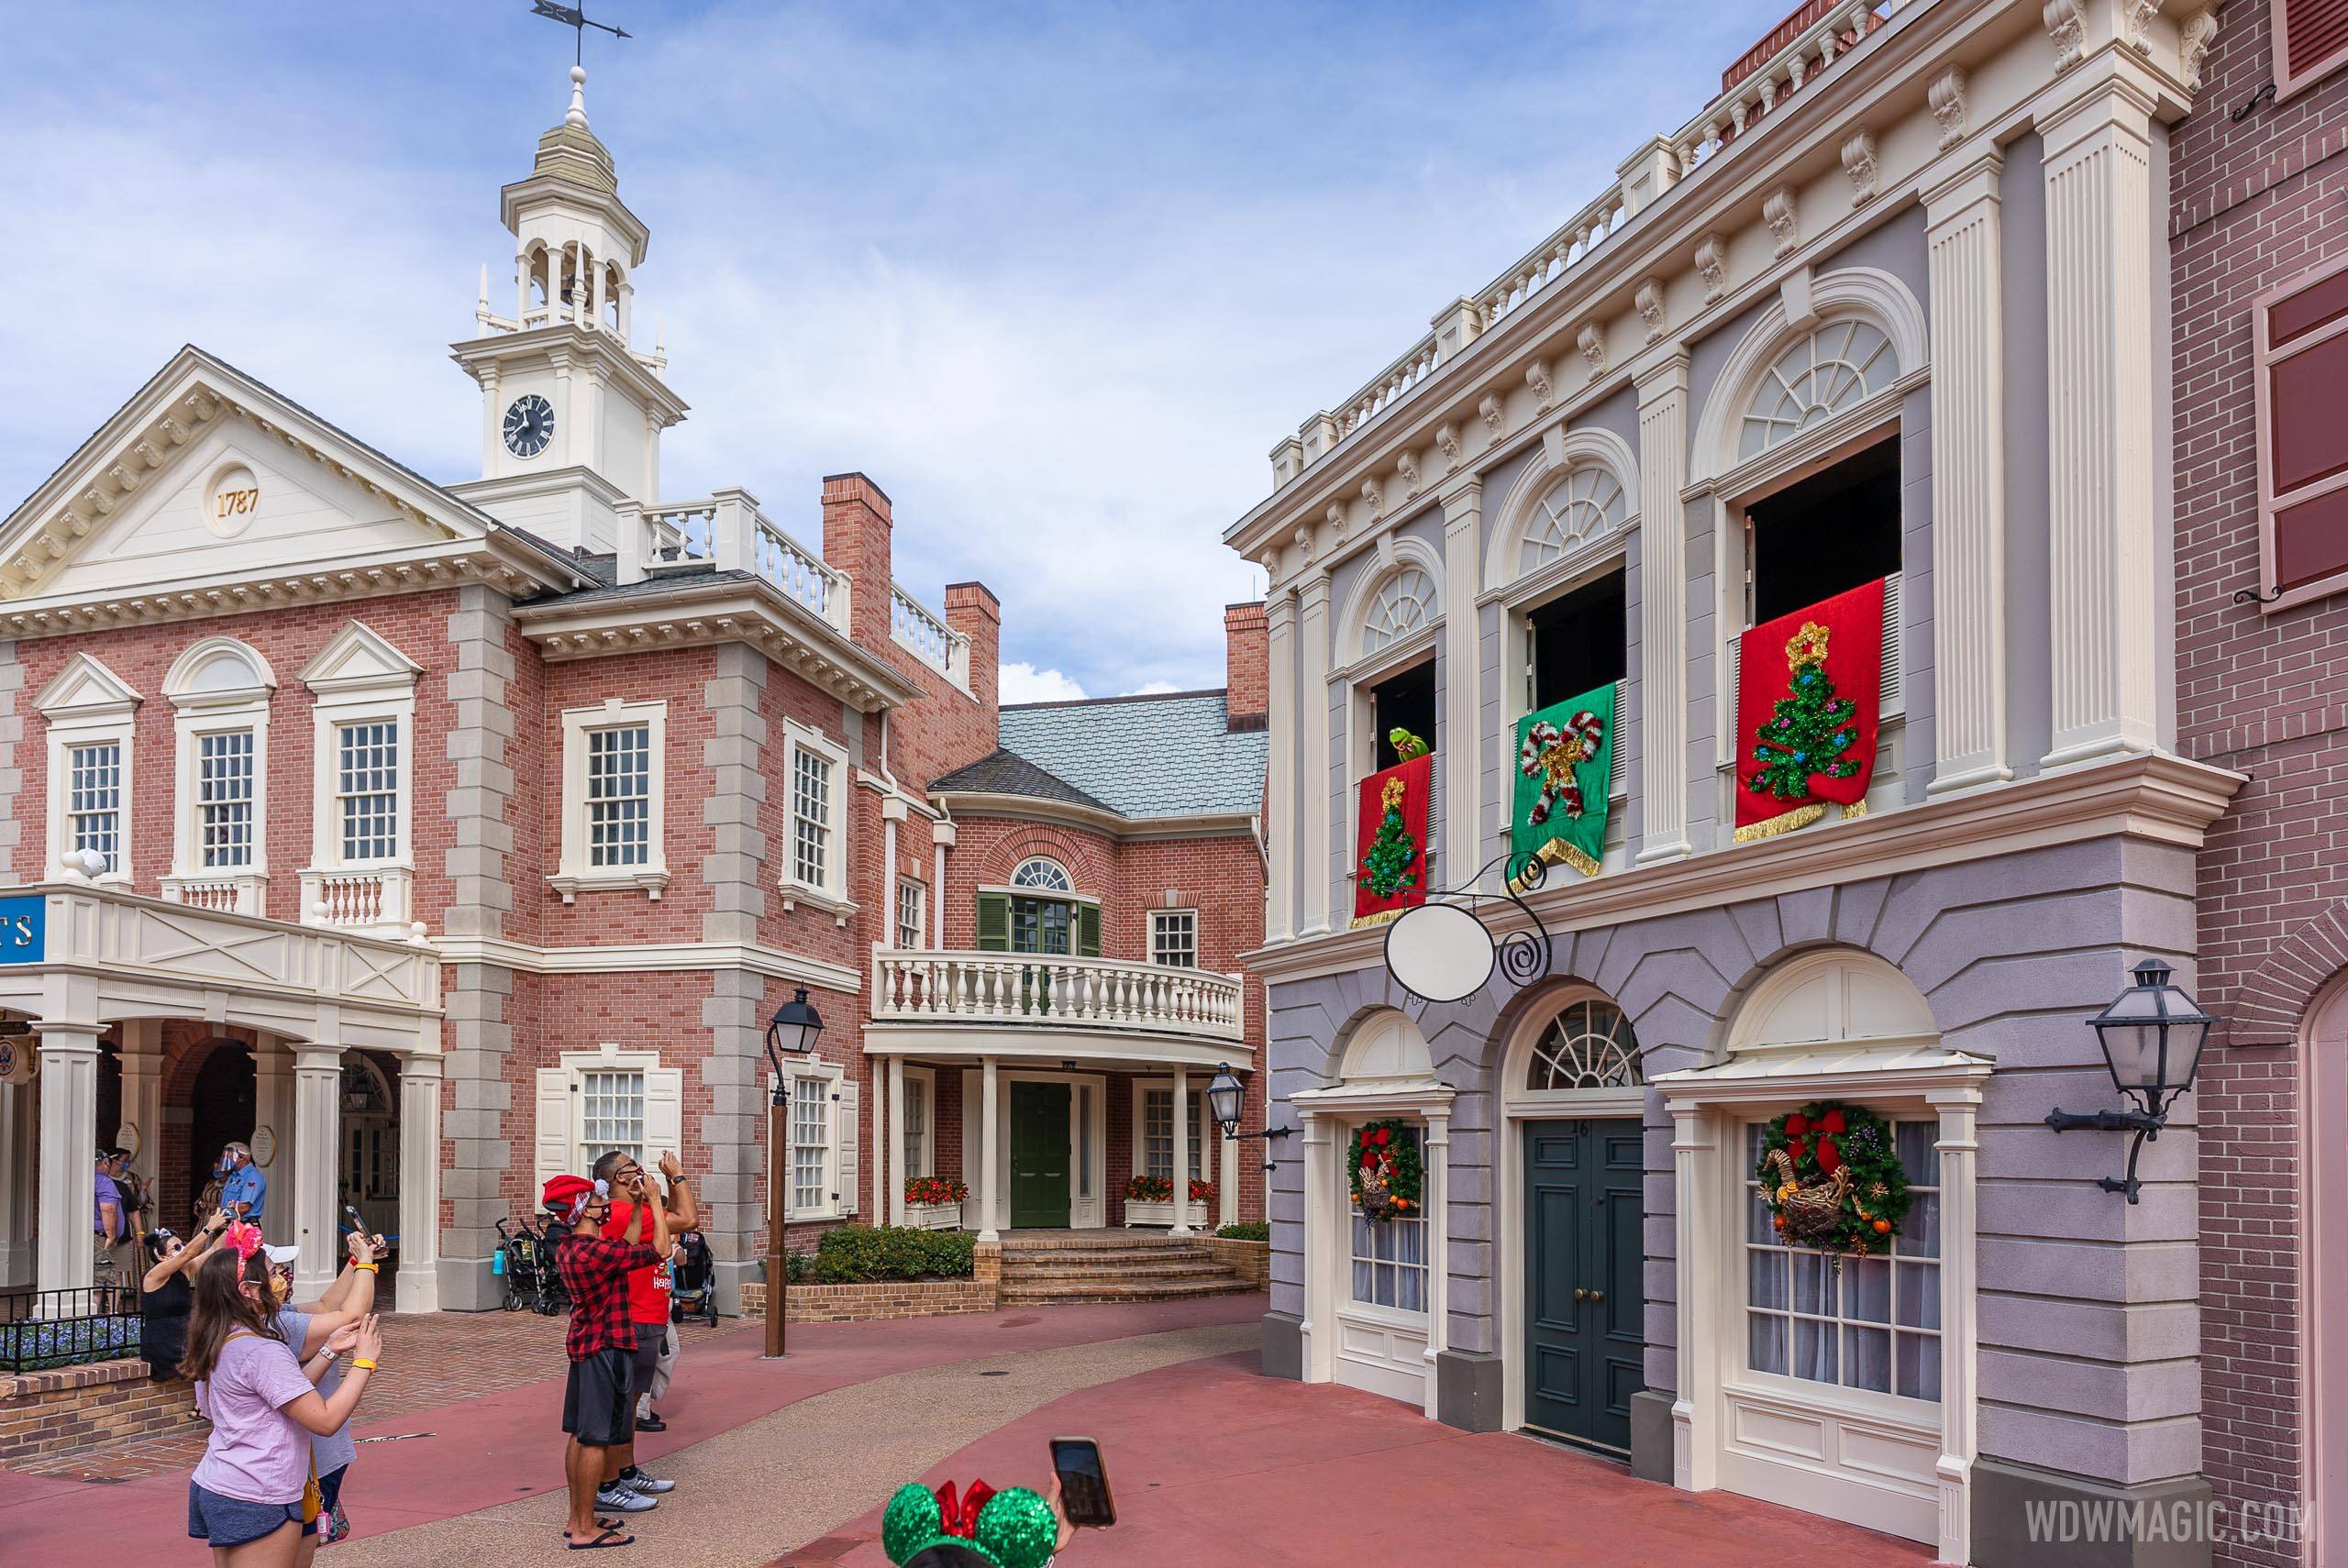 PHOTOS - Muppets return to the Magic Kingdom for the holidays